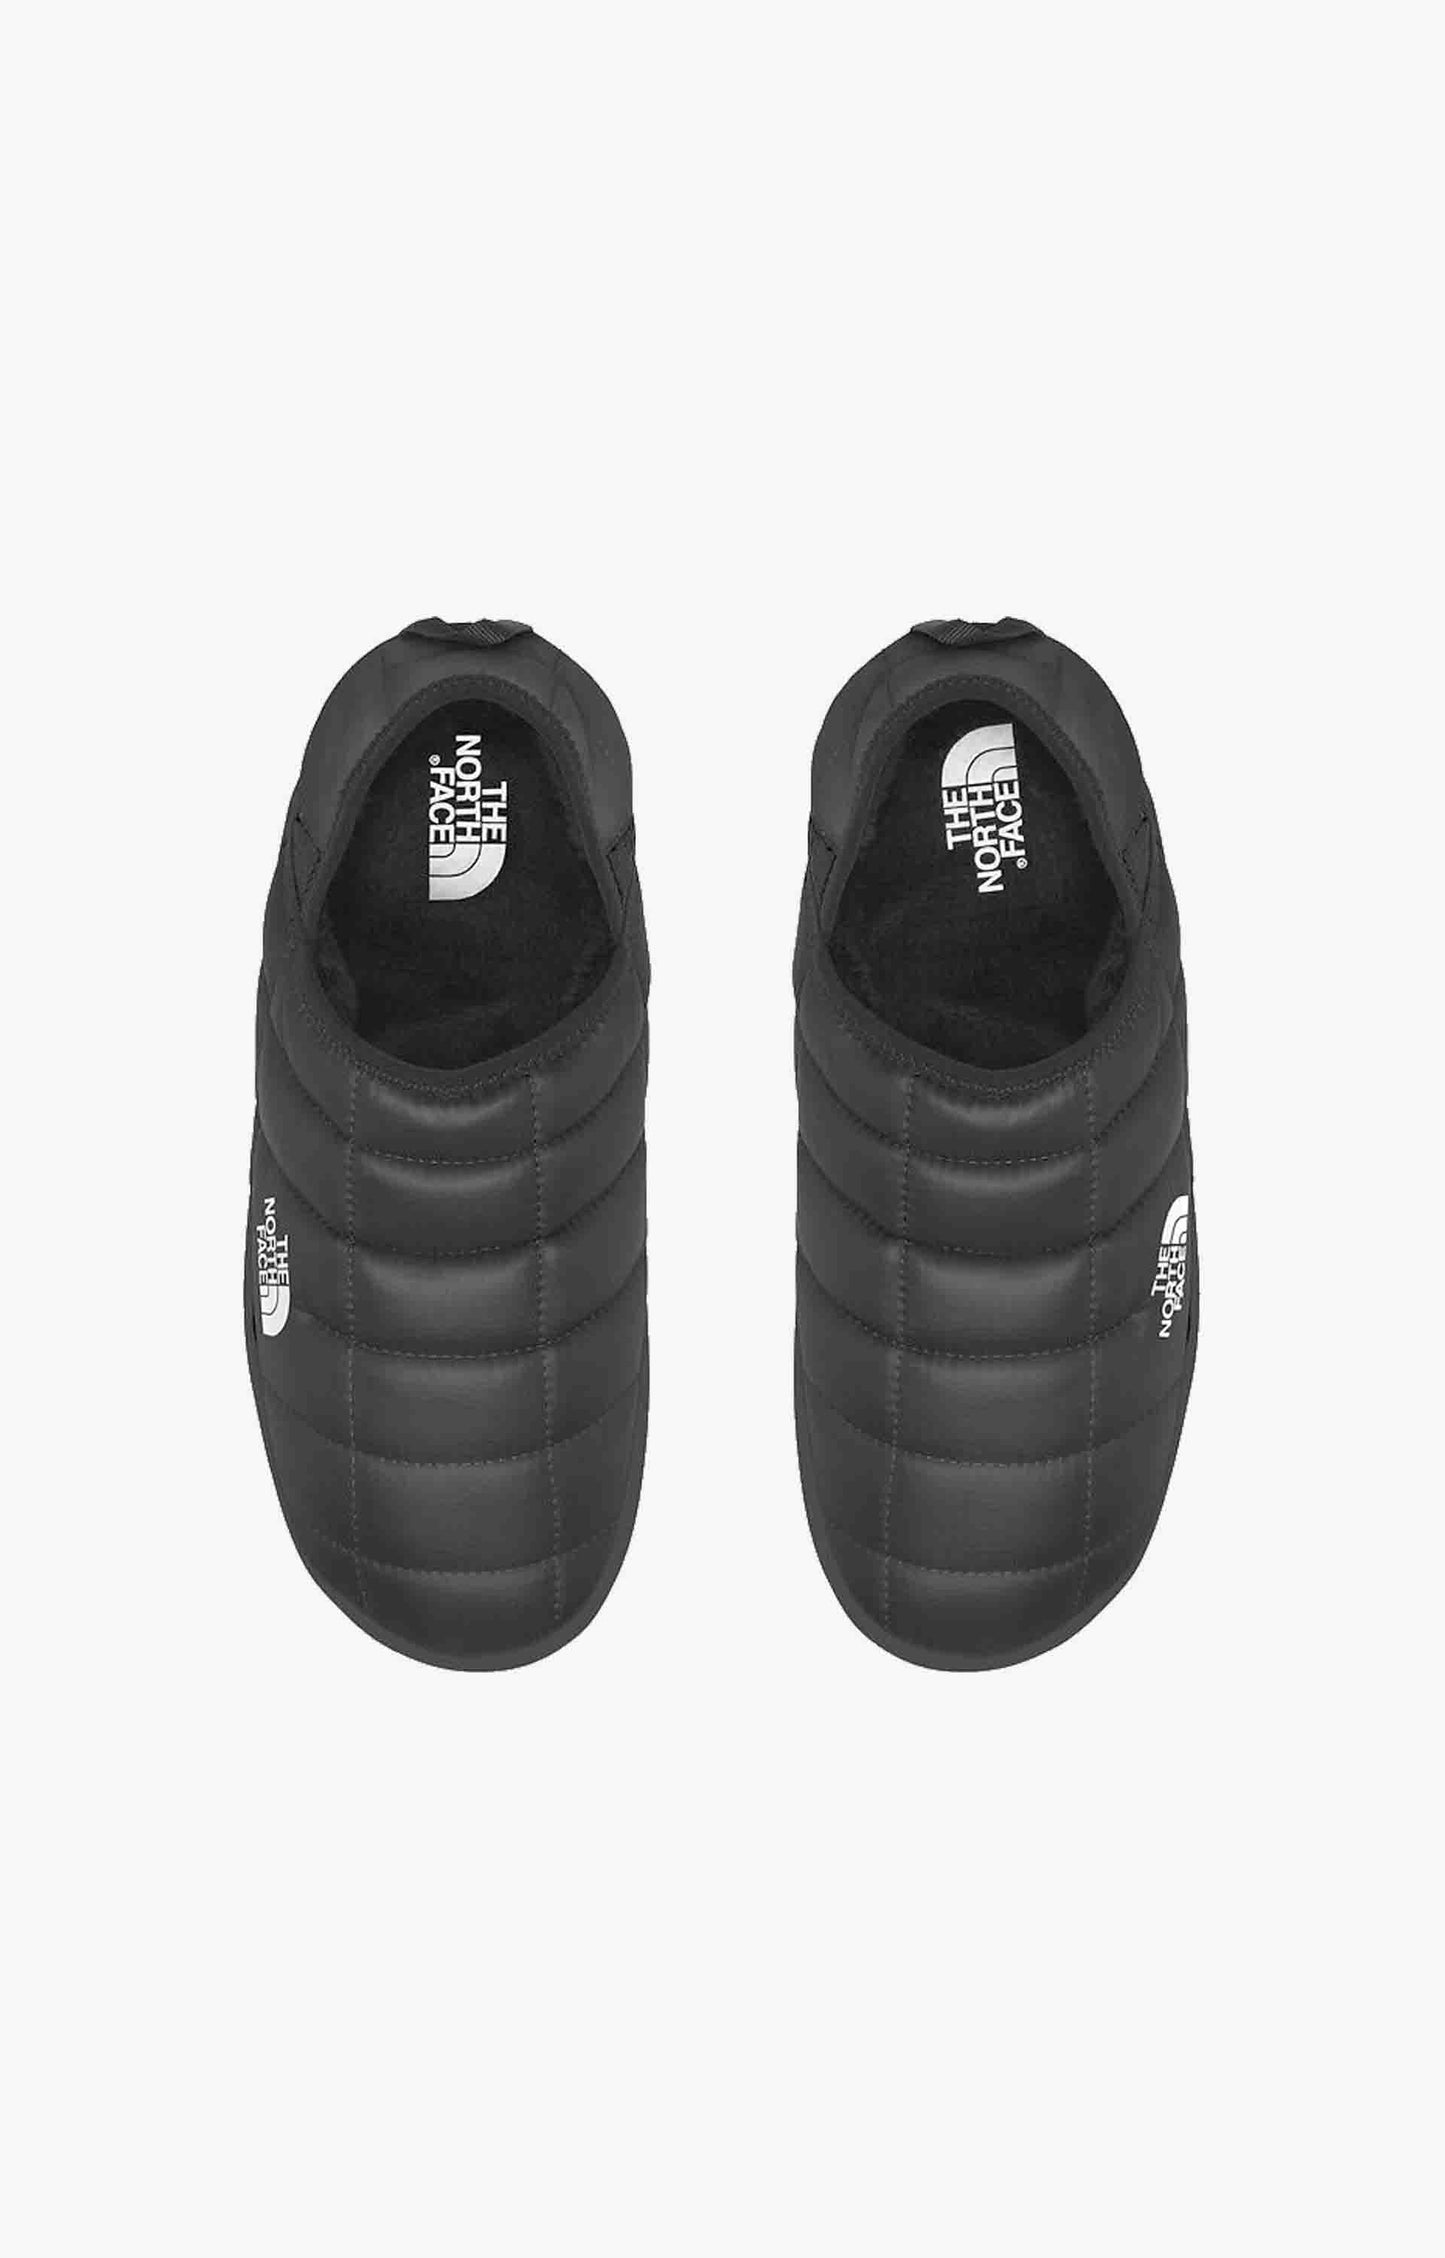 The North Face Men's ThermoBall™ Traction V Mules Shoes, Black/White